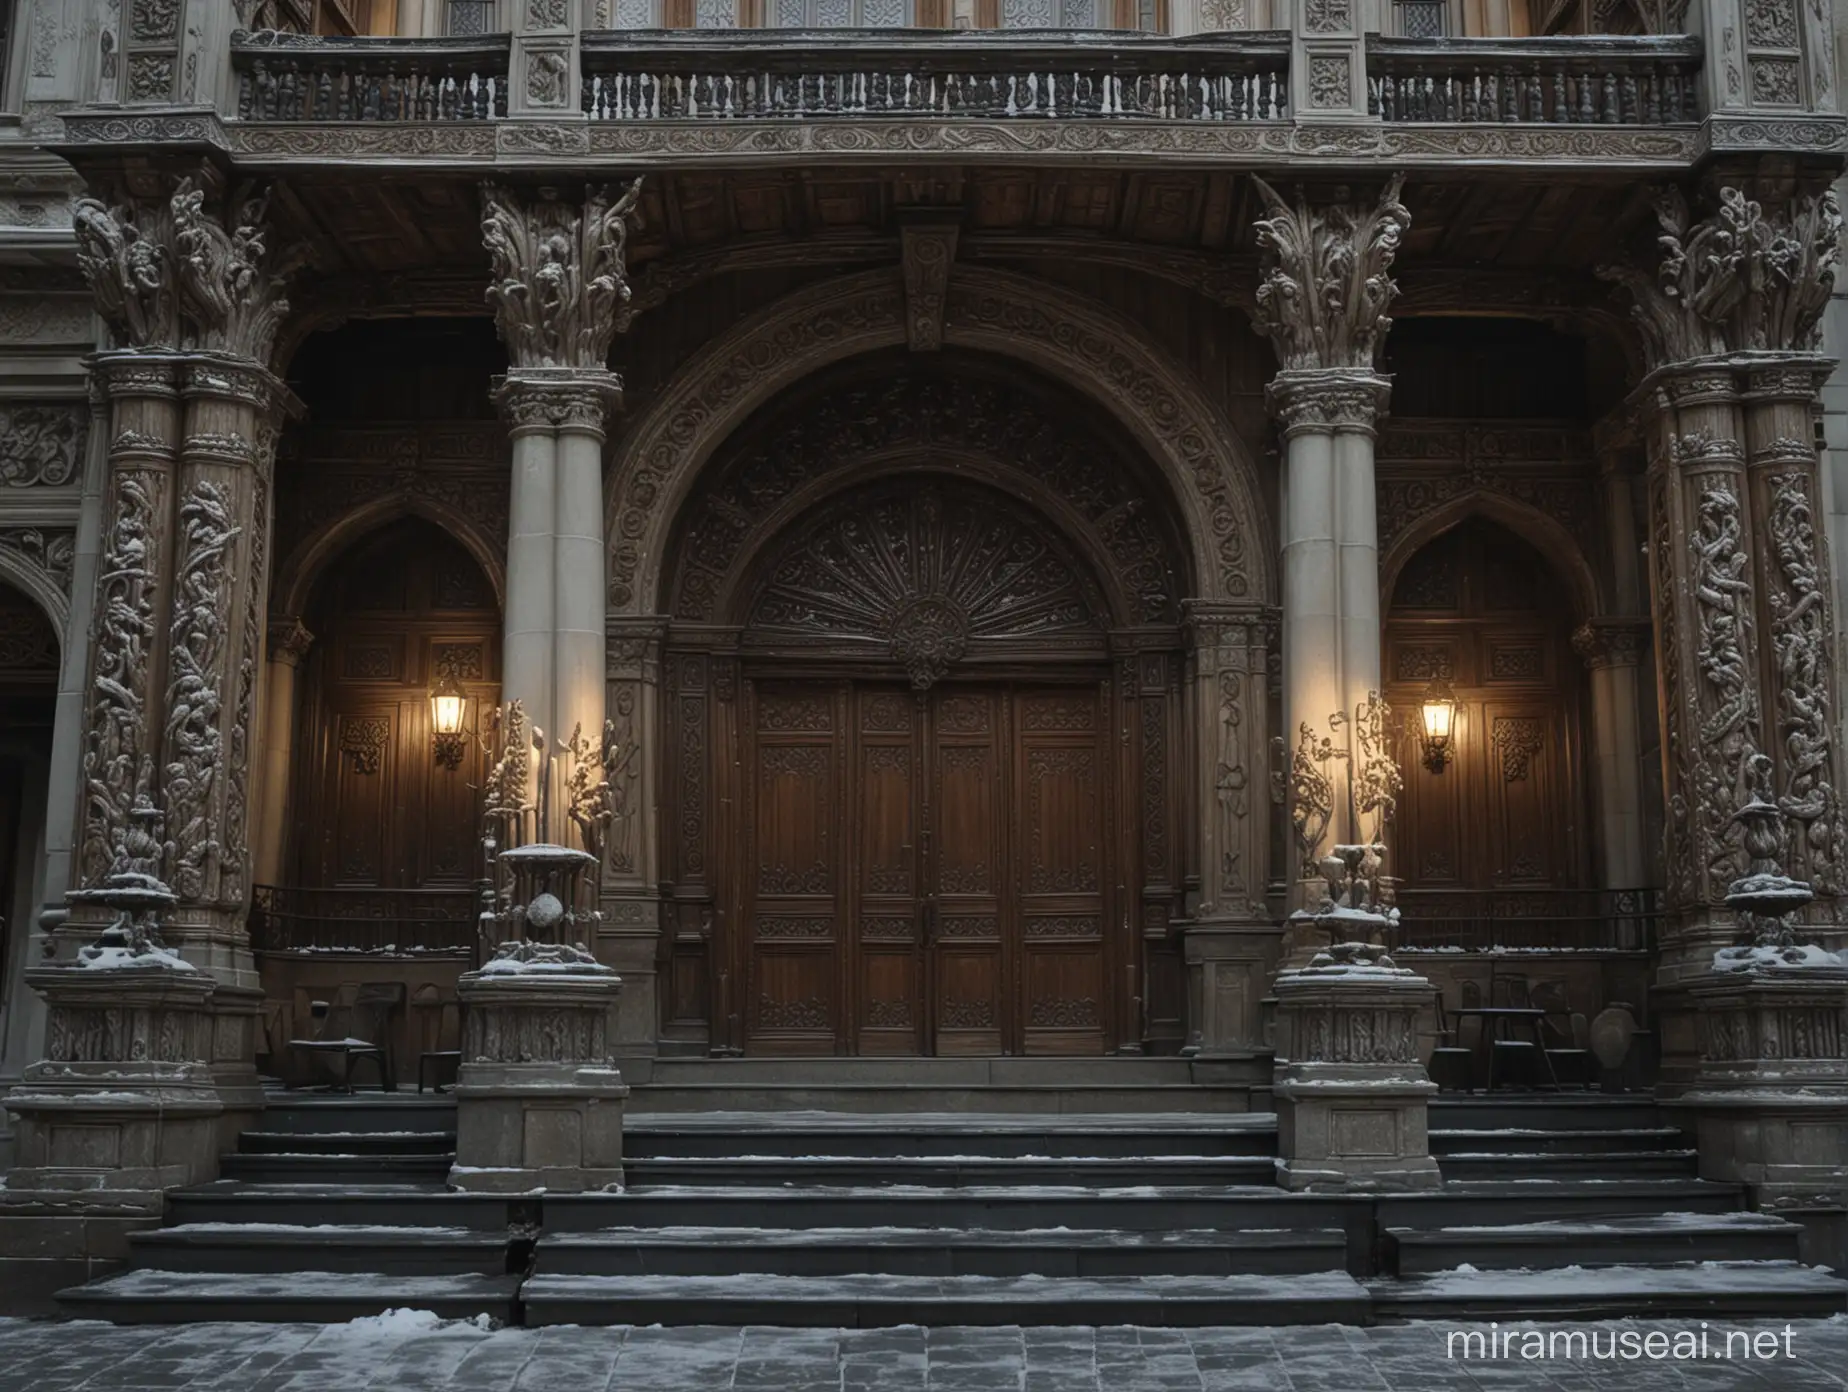 medieval, beautiful, gothic, street view, street view, full building, symmetric, standalone, intricate, snow covered, outside, full exterior of theater house made of wood, ornate, flower carvings, animal carvings, columns, silver plating, massive central stair case, dark, imposing, stylized, oil painting, 4k, beautiful lighting